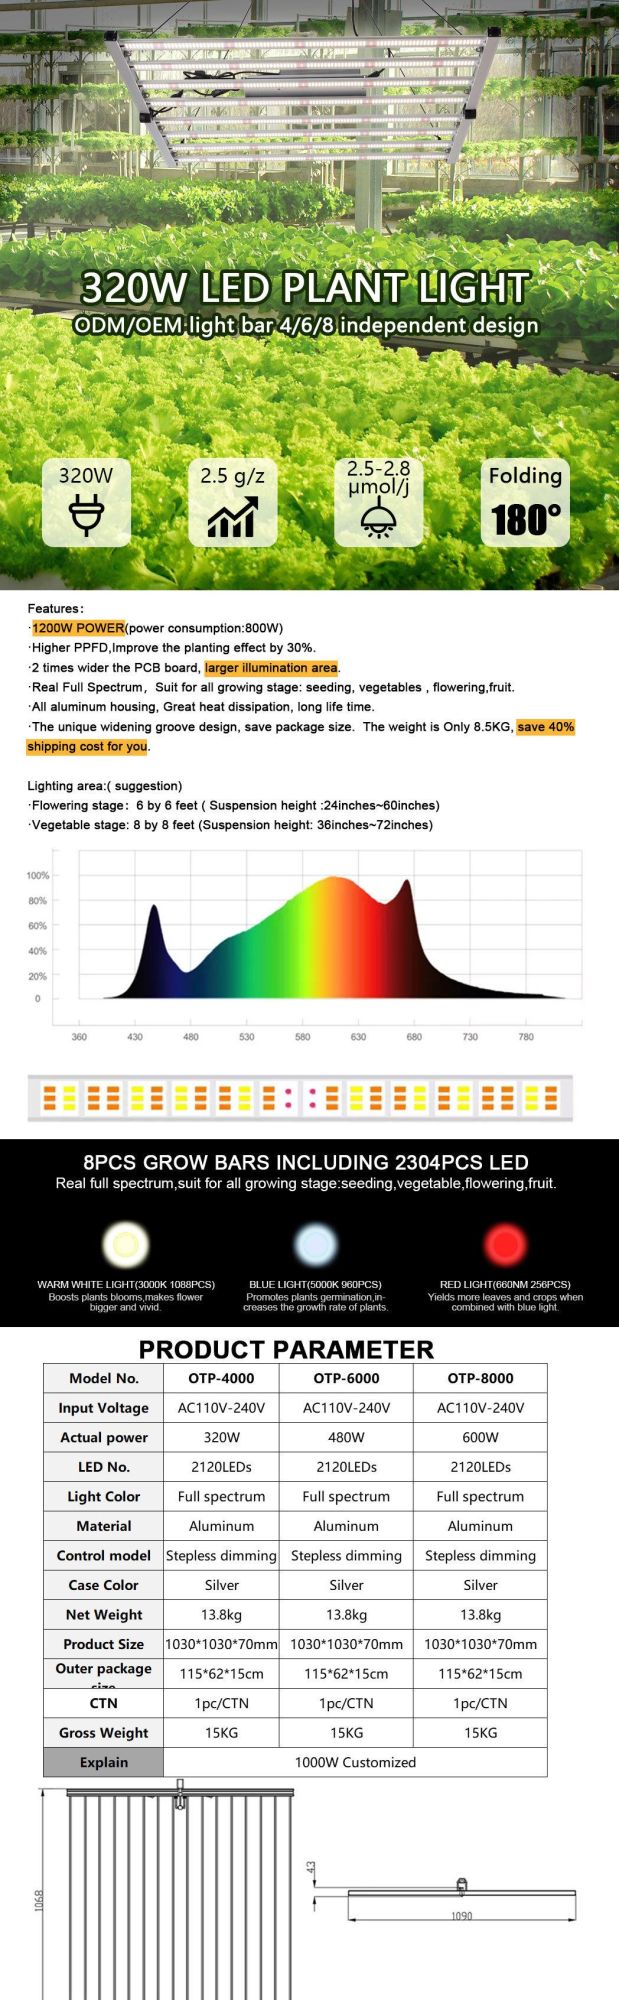 High Performance Replace PRO Spider Farmer Full Spectrum 1000W LED Grow Lighting for Medical Plants